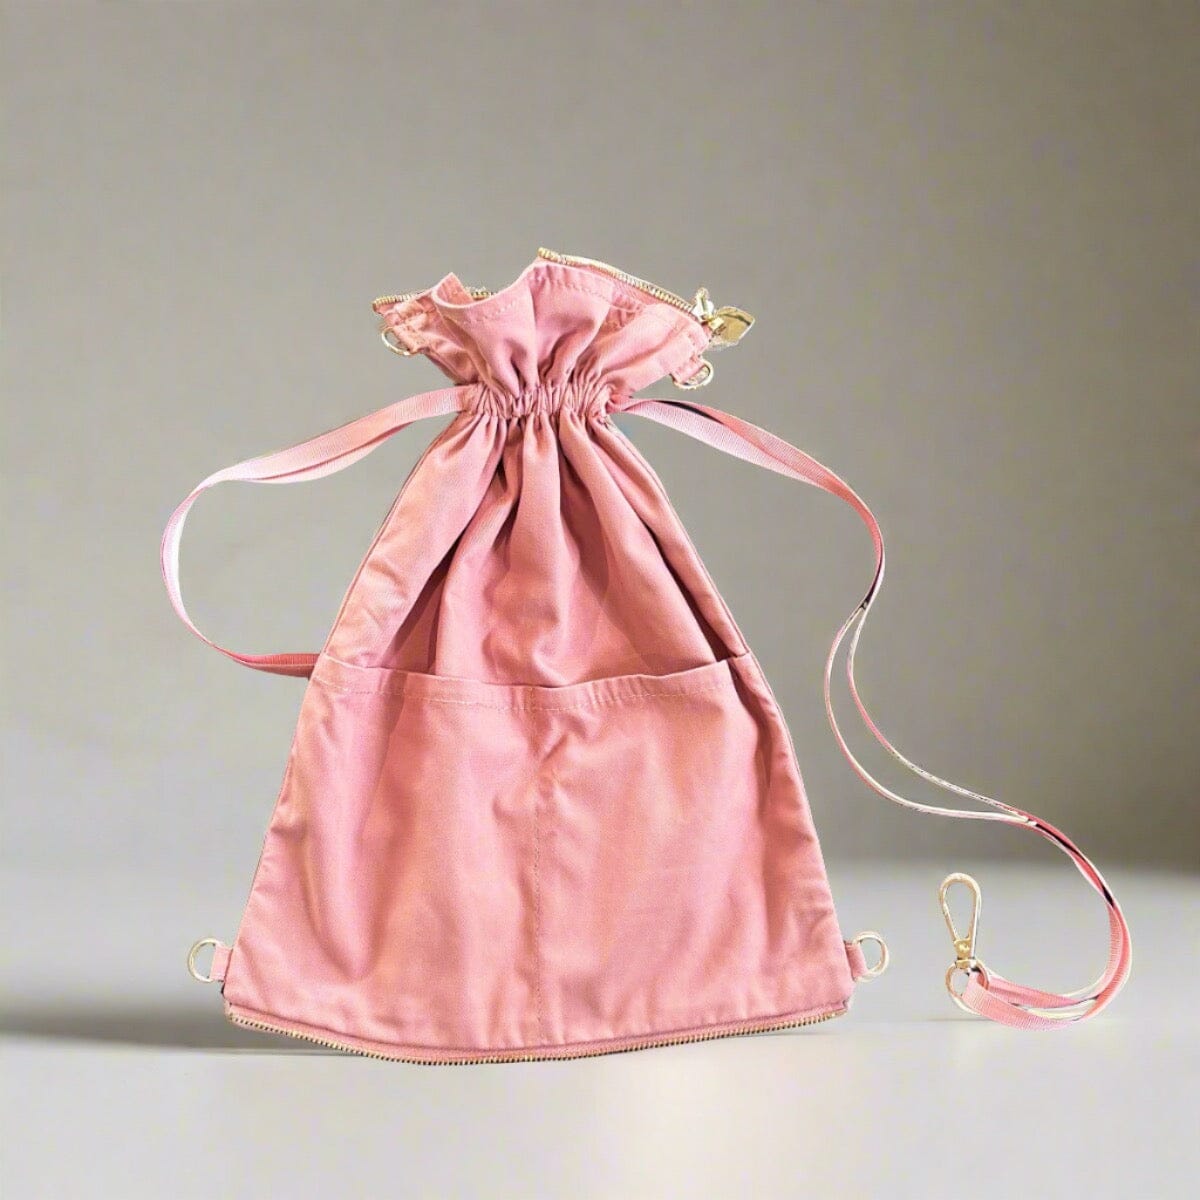 Clasp clutch pouch Bags Accessories LOVEFREYA Pink Drawstring 